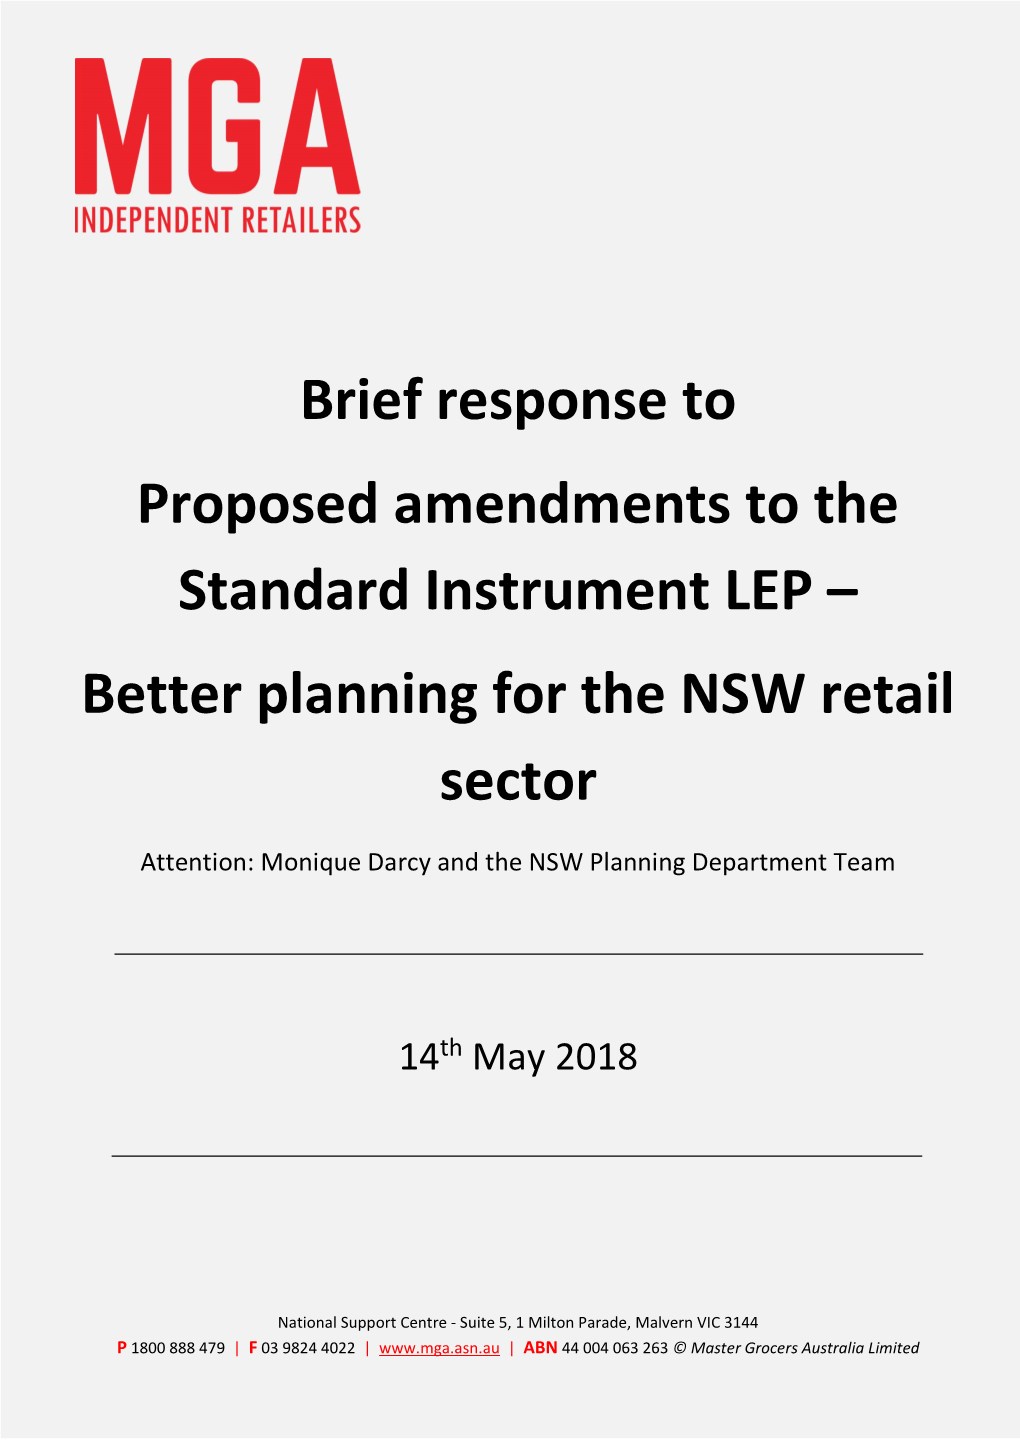 Better Planning for the NSW Retail Sector